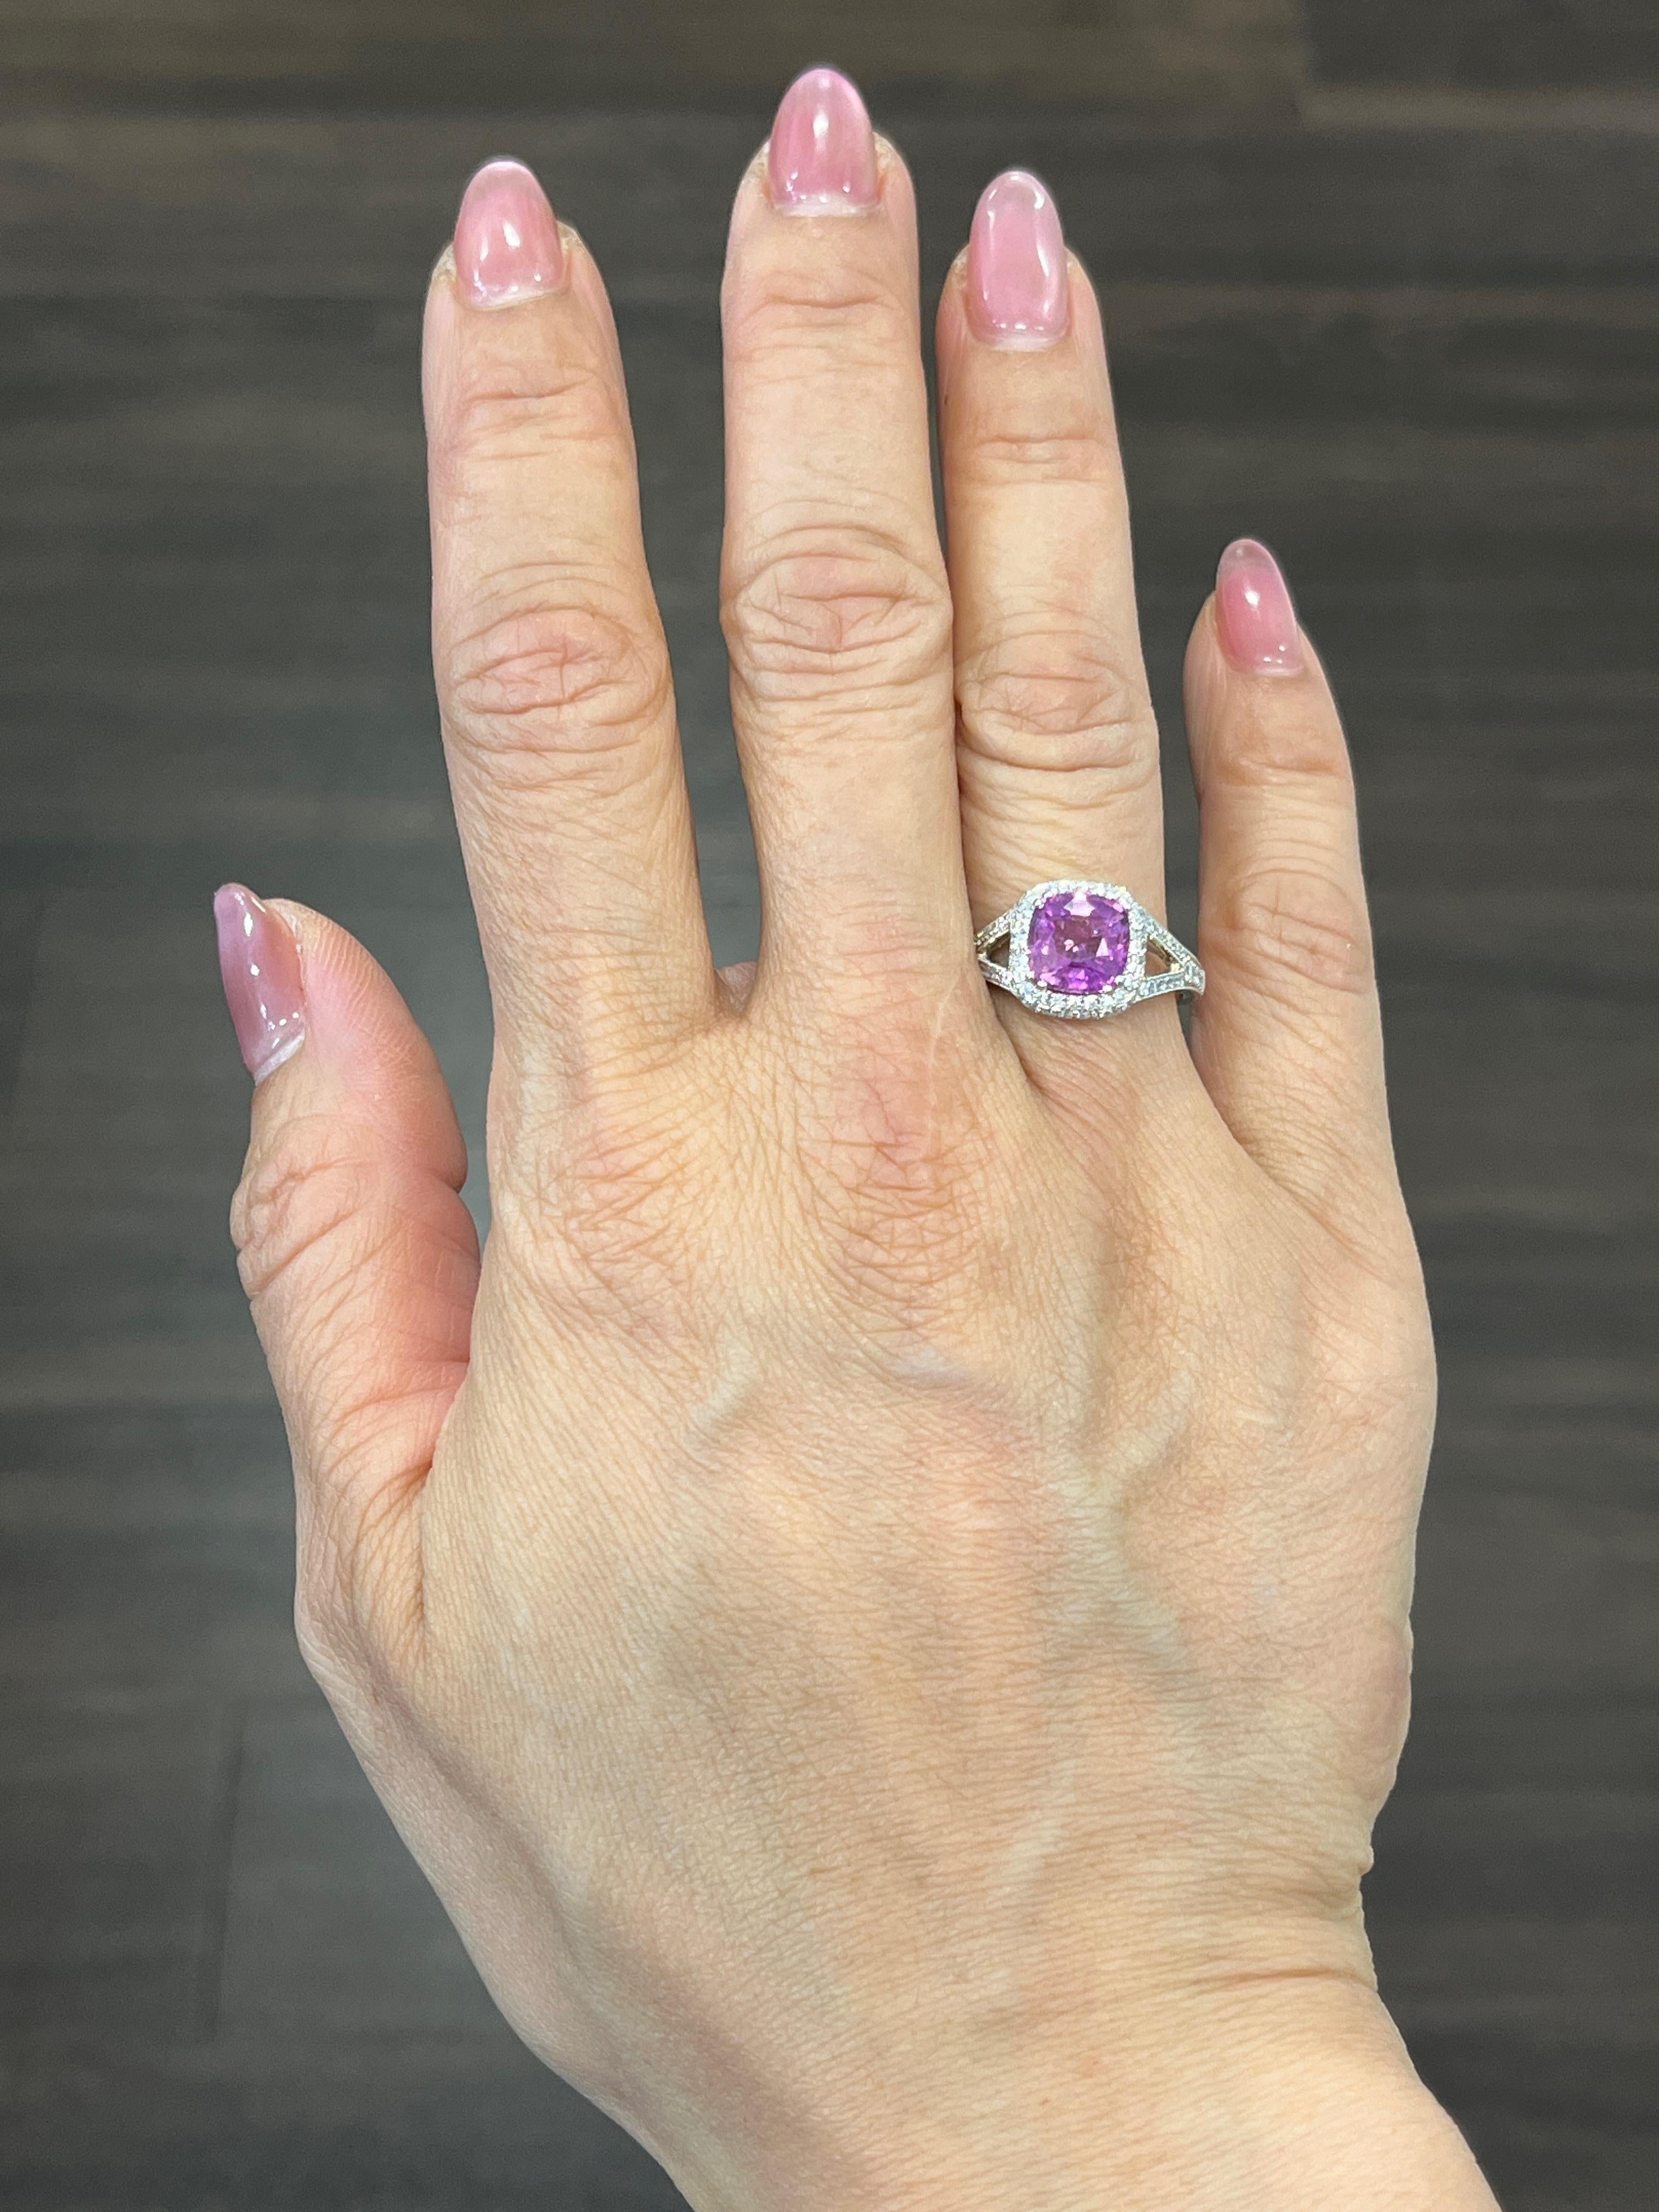 Check out this gorgeous 18k white gold ring set with a natural pink sapphire weighing 2.55 ct. Surrounding the pink sapphire are 78 round cut diamonds that weigh a total of 0.63 ct. The diamonds are G/H in color and VS2/SI1 in clarity. This ring is